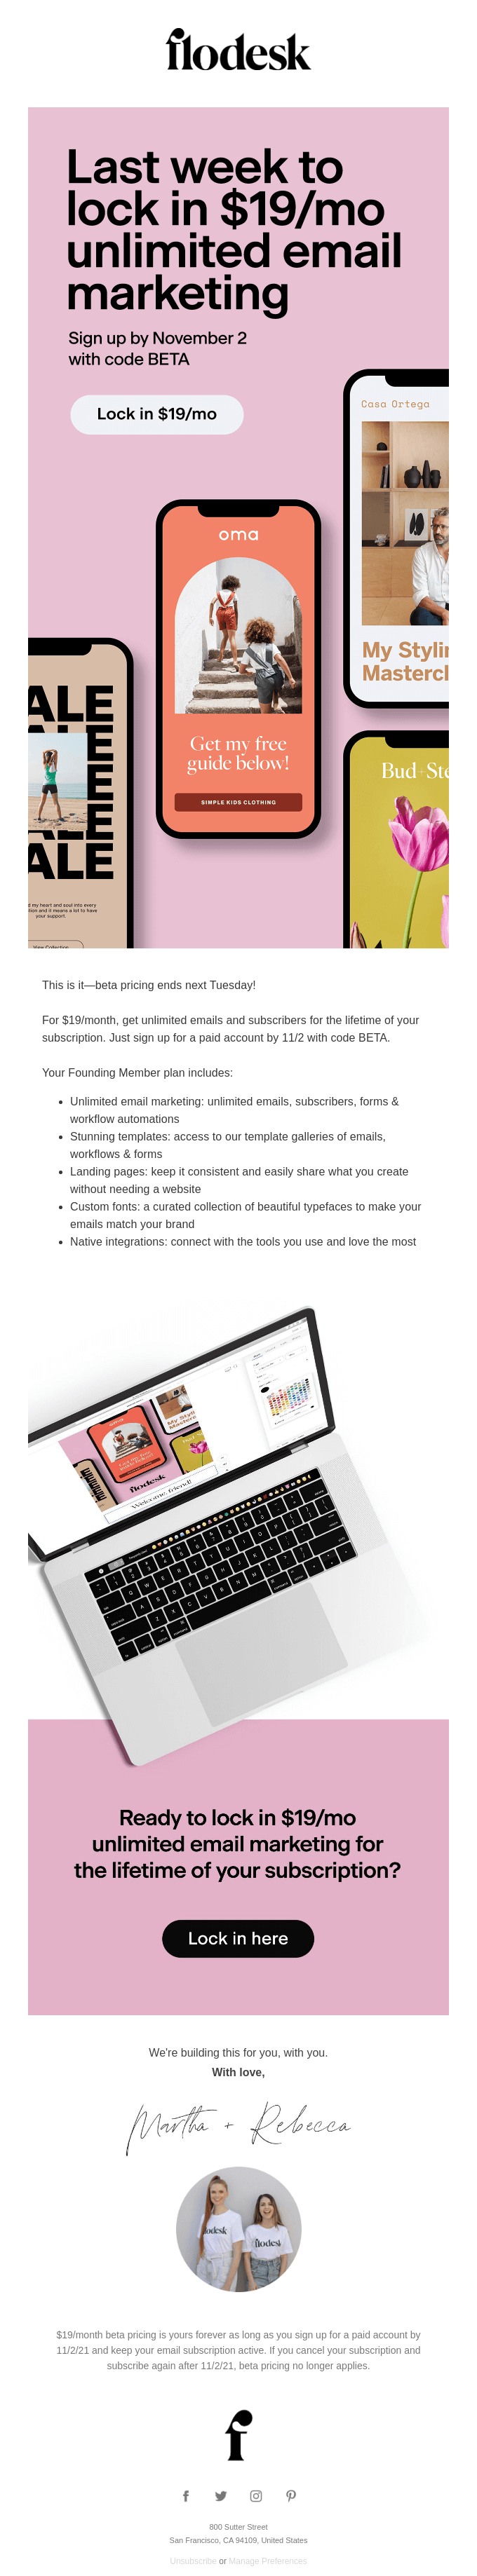 Flodesk email with Black CTA 